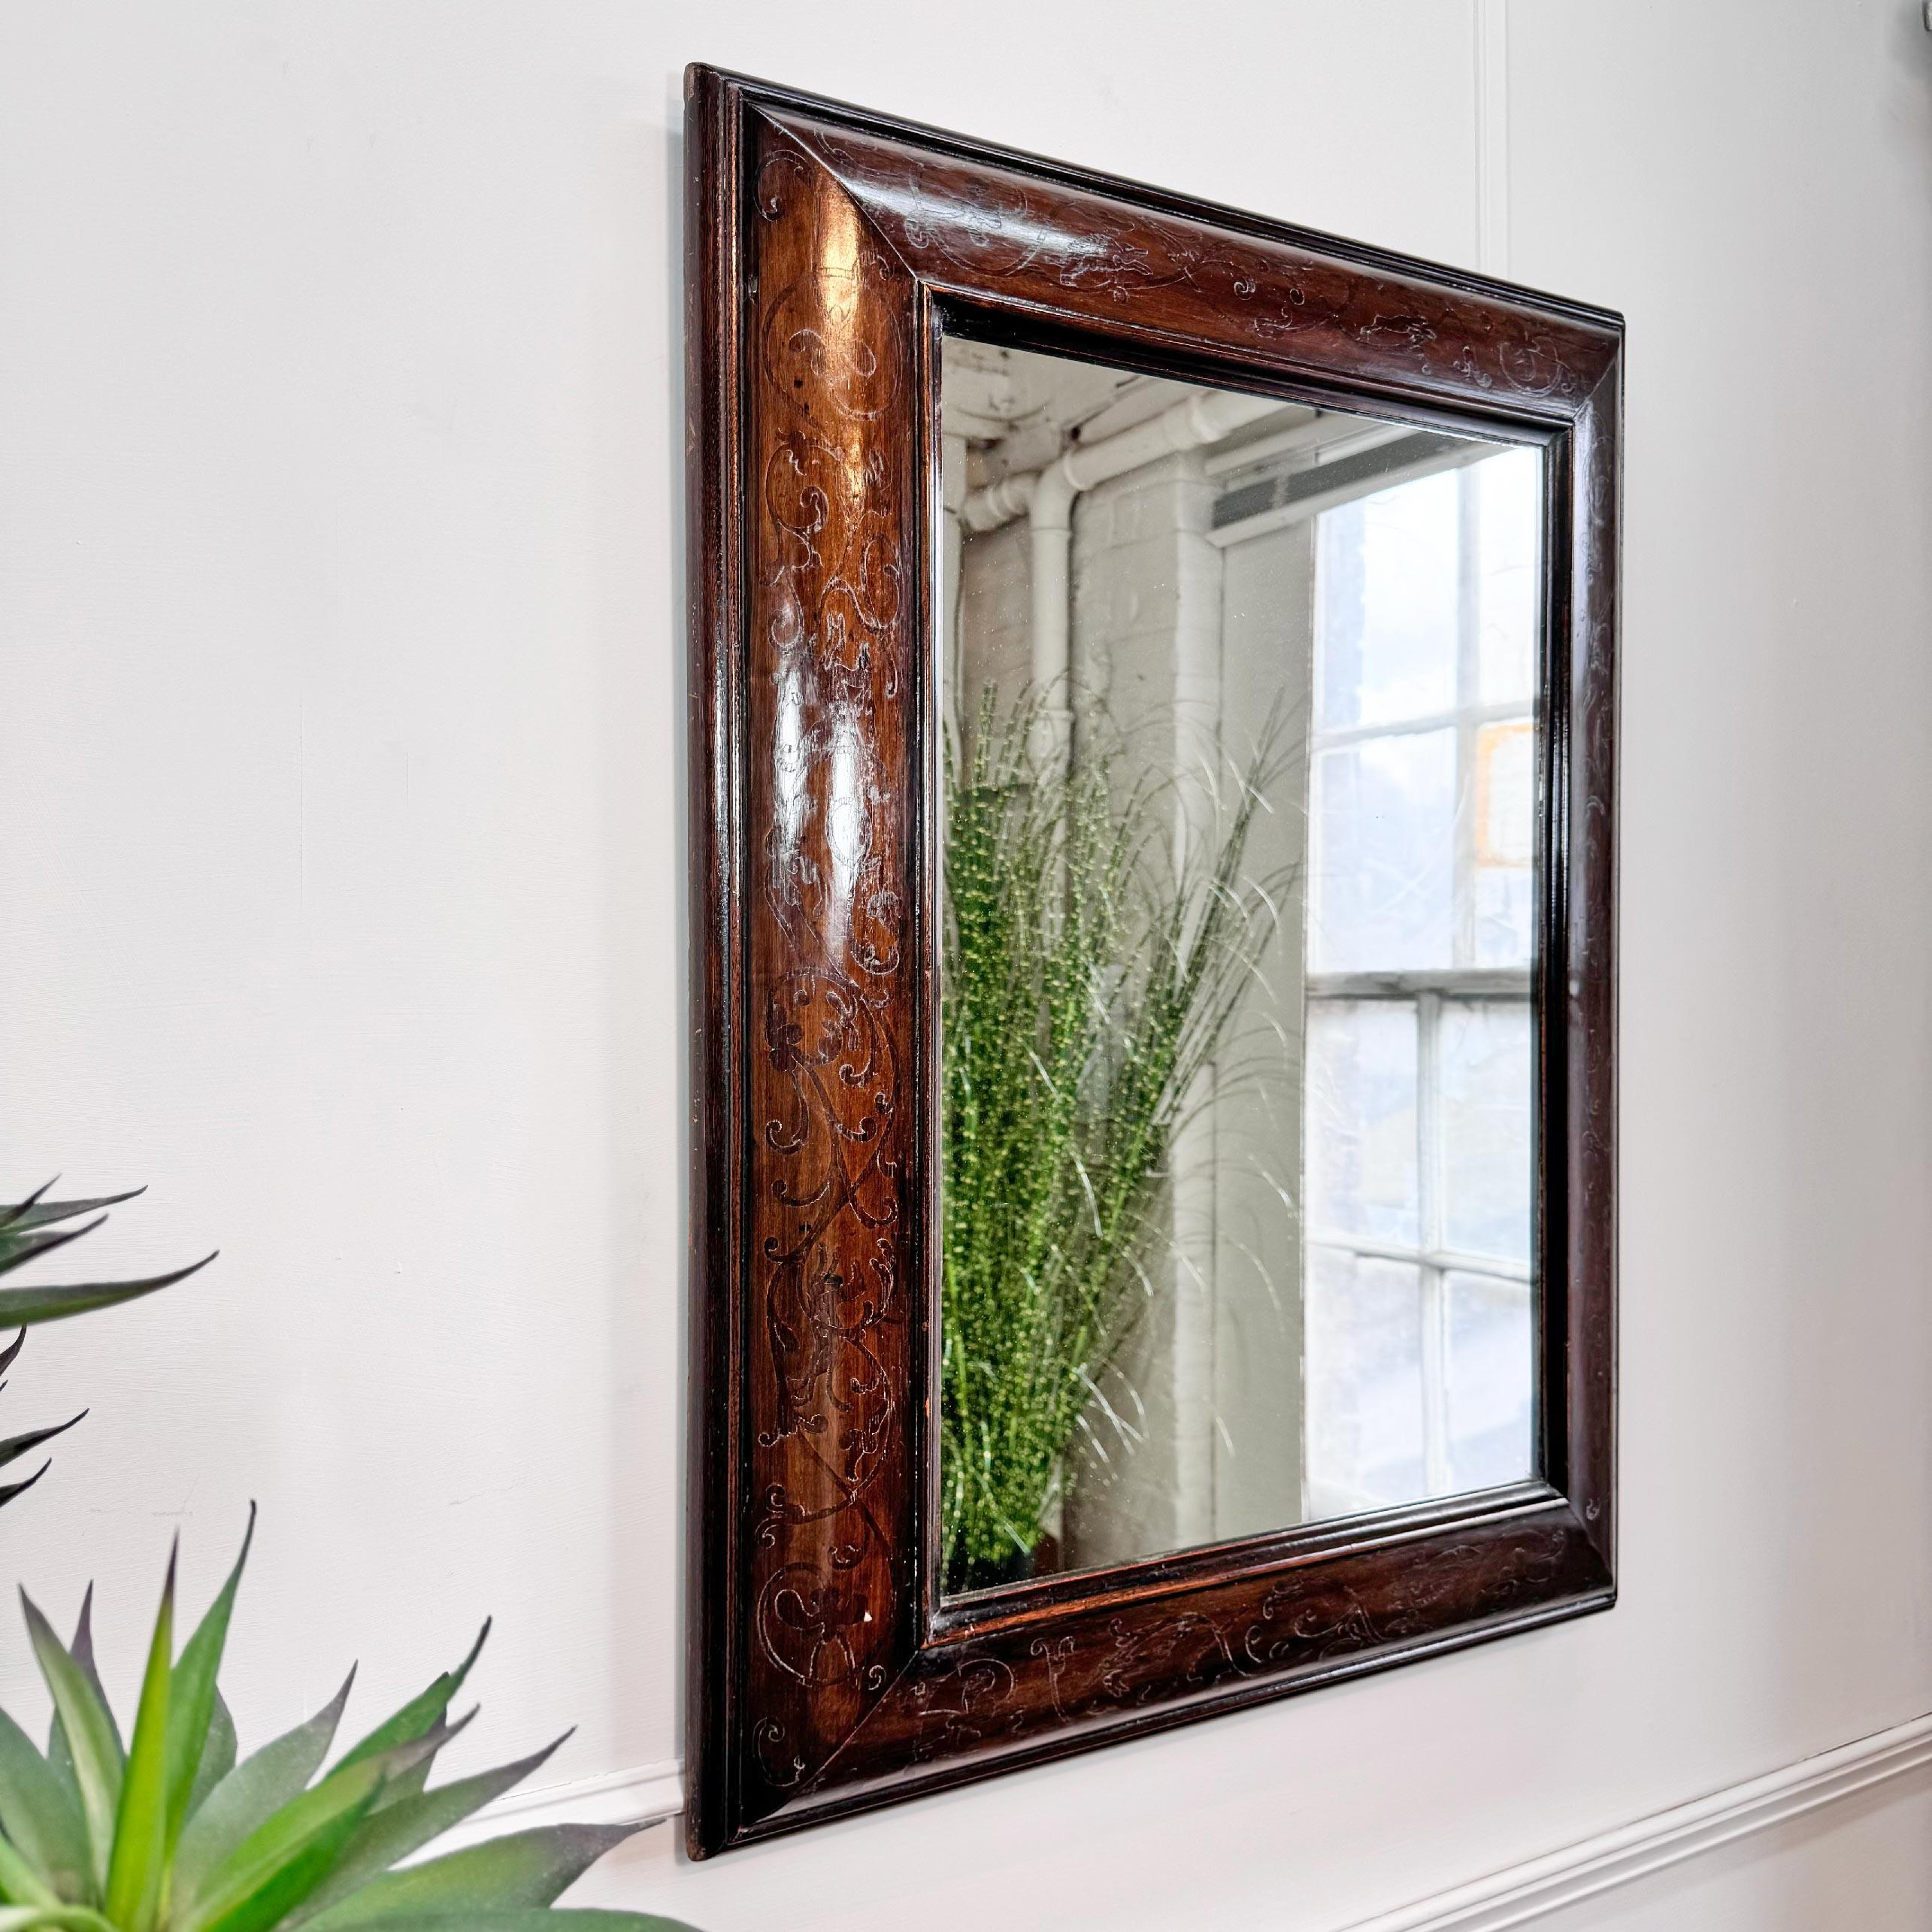 Exceptional 18th Century Marquetry Mirror in the William and Mary style For Sale 4